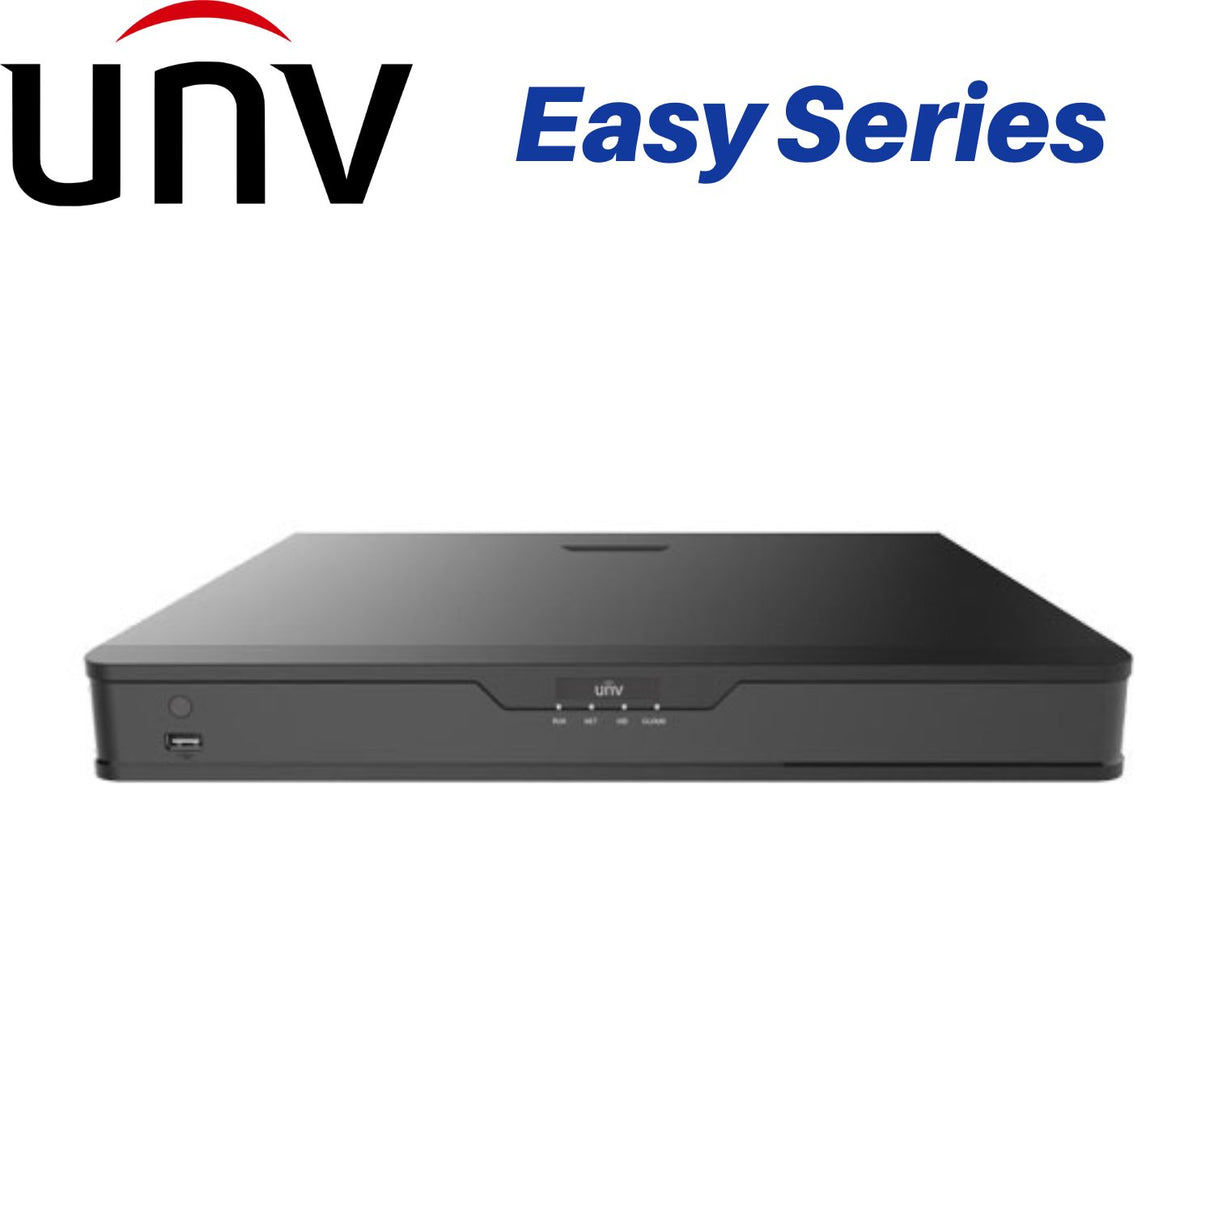 Uniview 16CH Network Video Recorder: 8MP/4K, 160MBPS INPUT, 2-SATA HDD, Easy Series - NVR302-16S2-P16